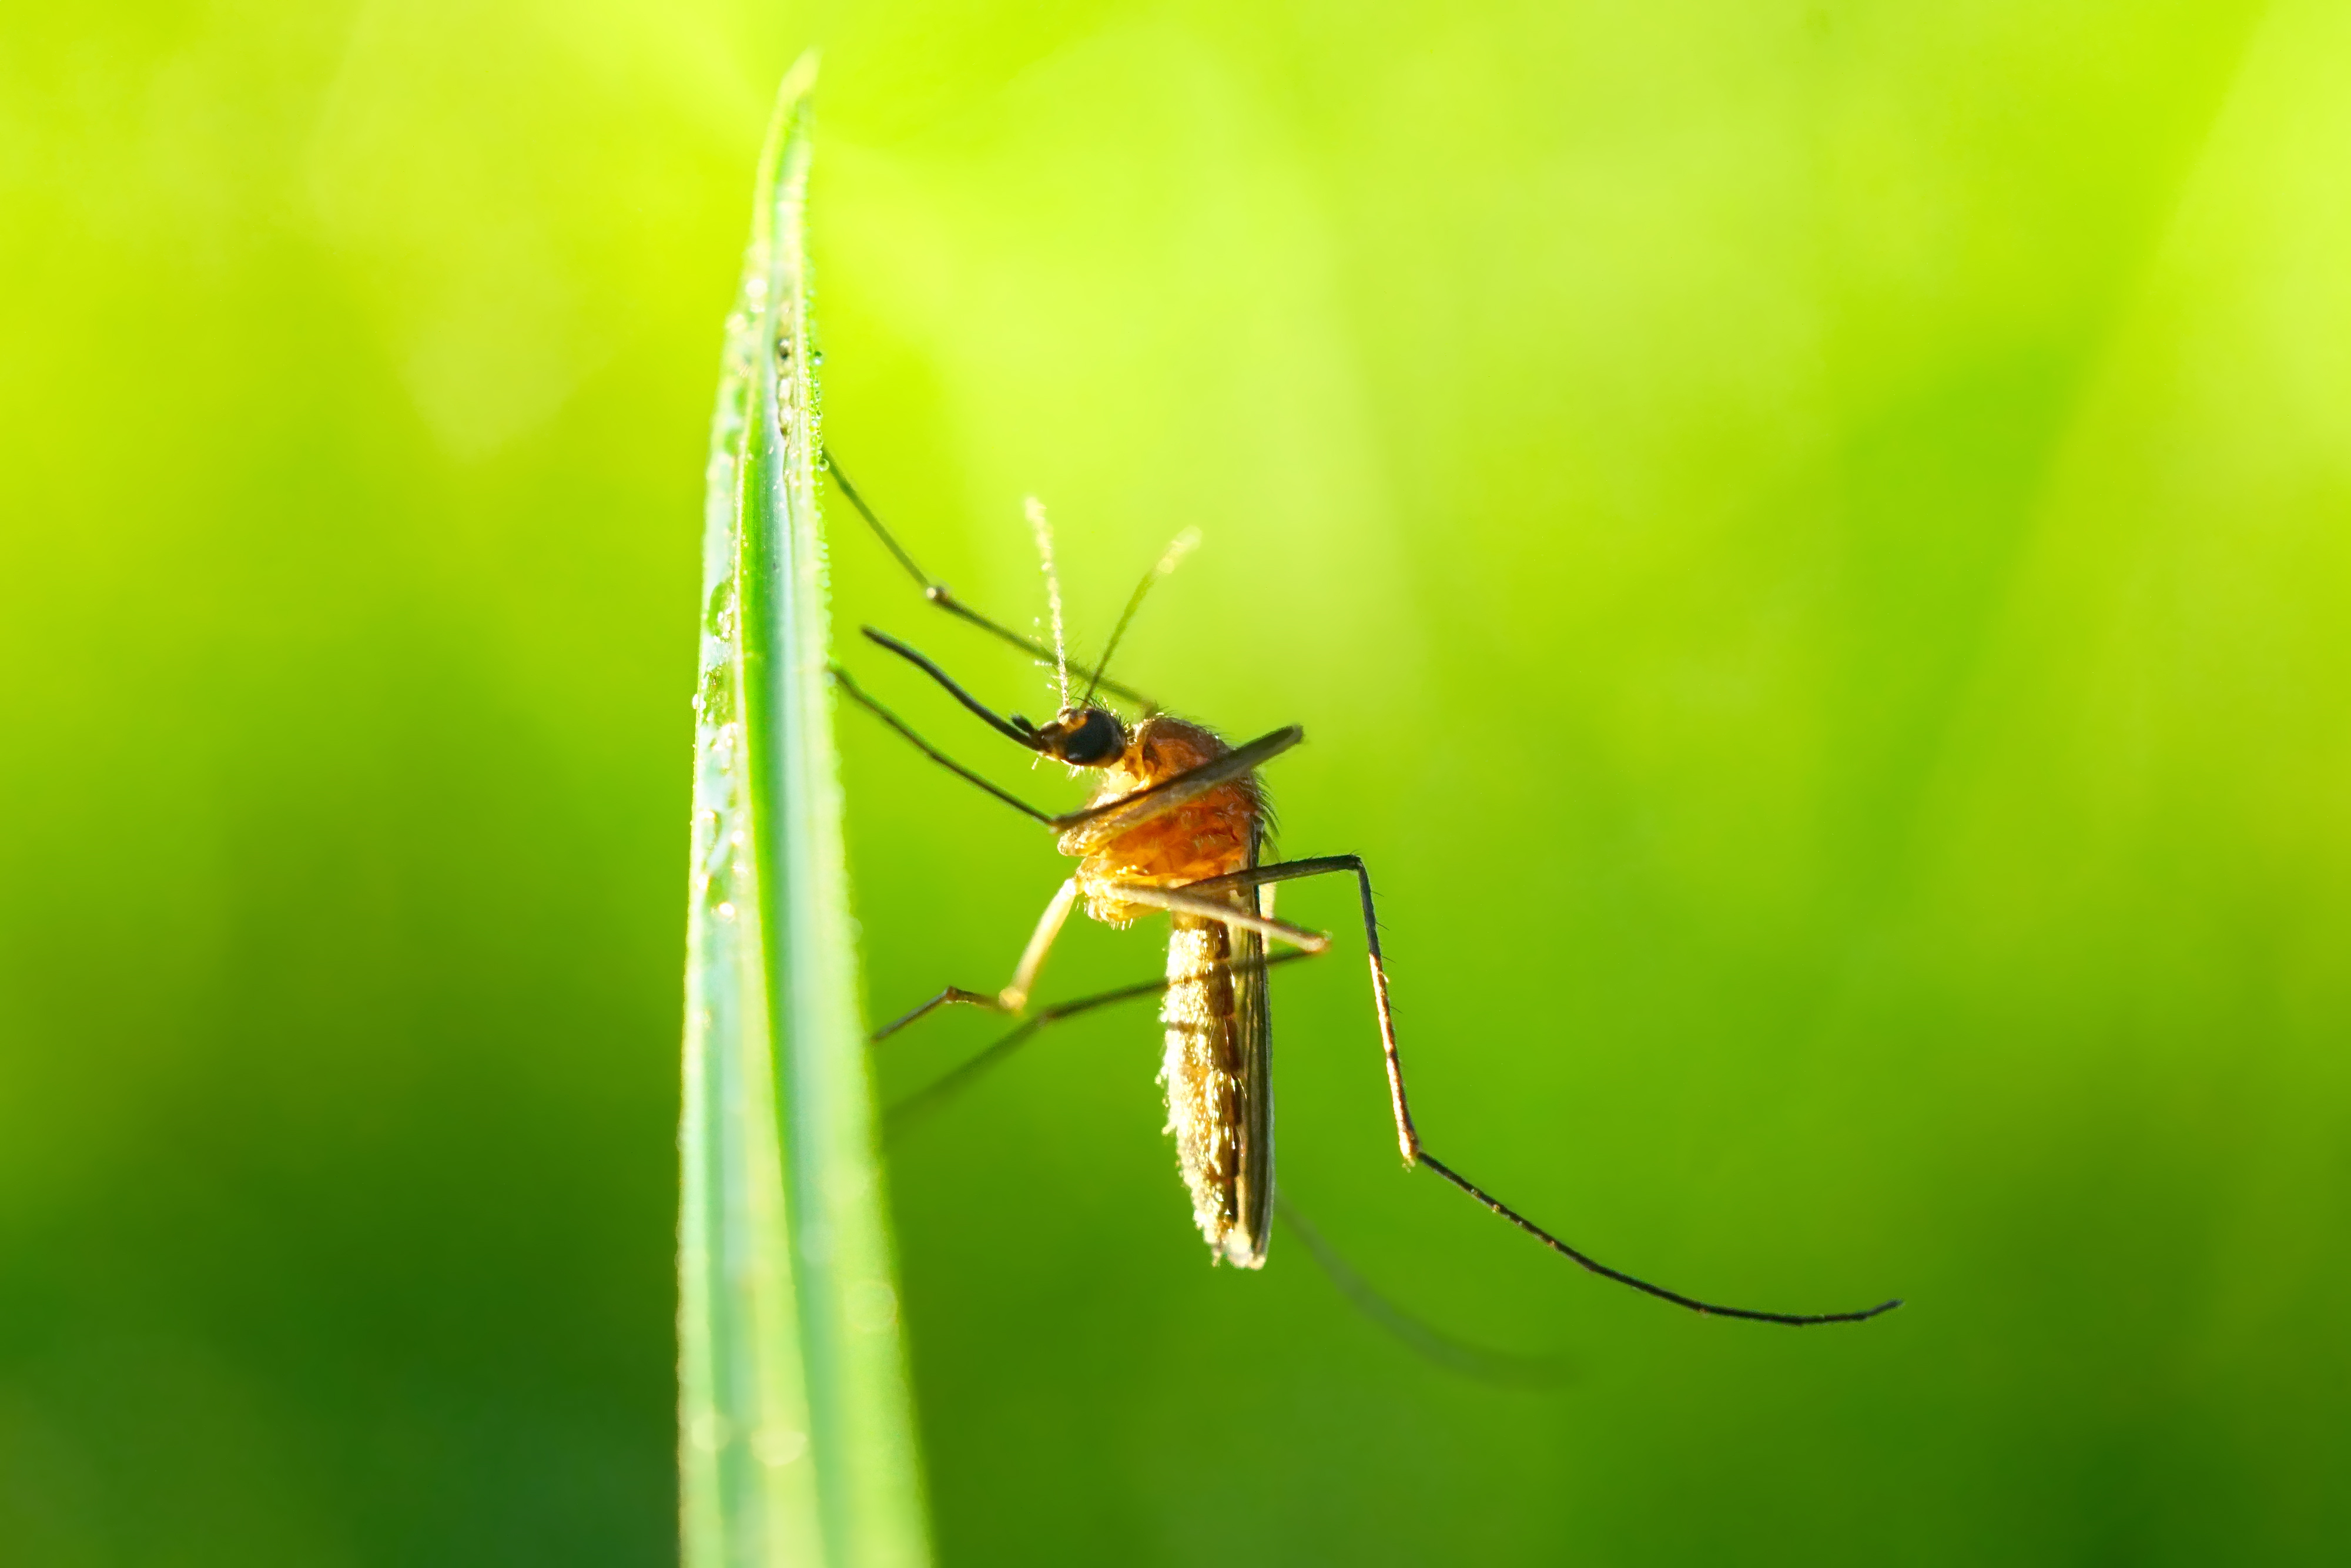 UC San Diego using genetically modified mosquitoes to take on malaria